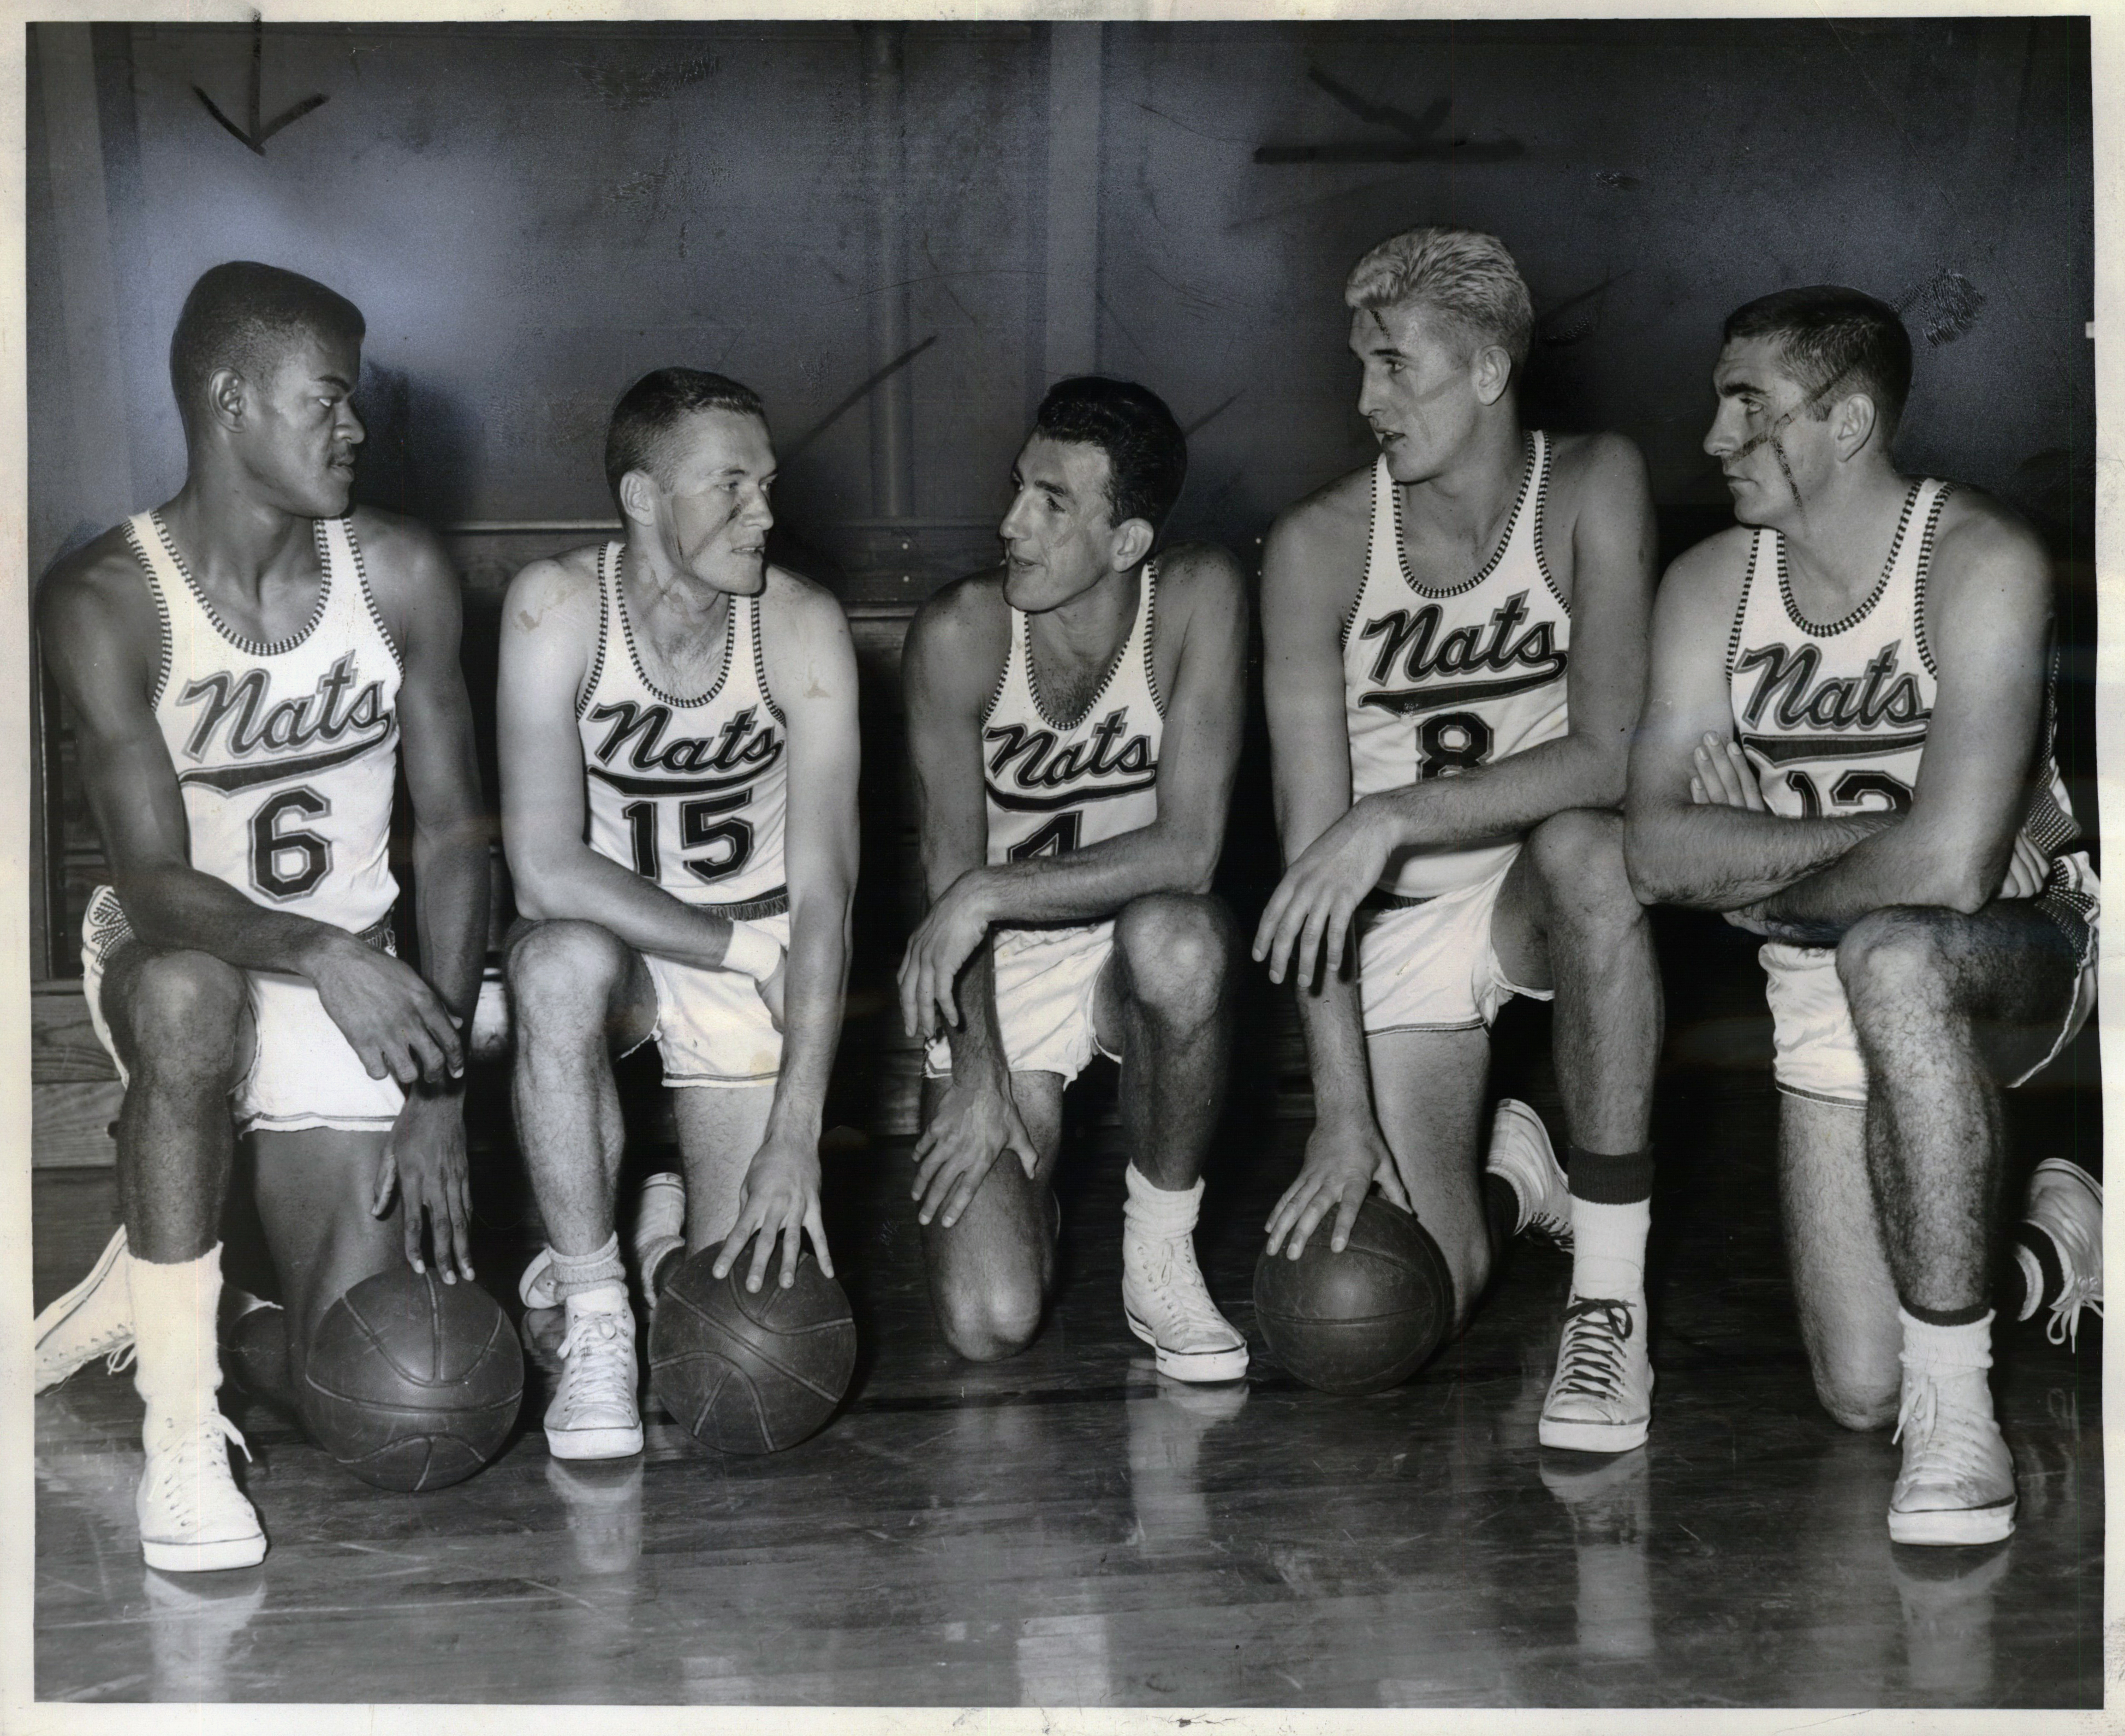 Rockford's 15 greatest basketball players of the last 75 years